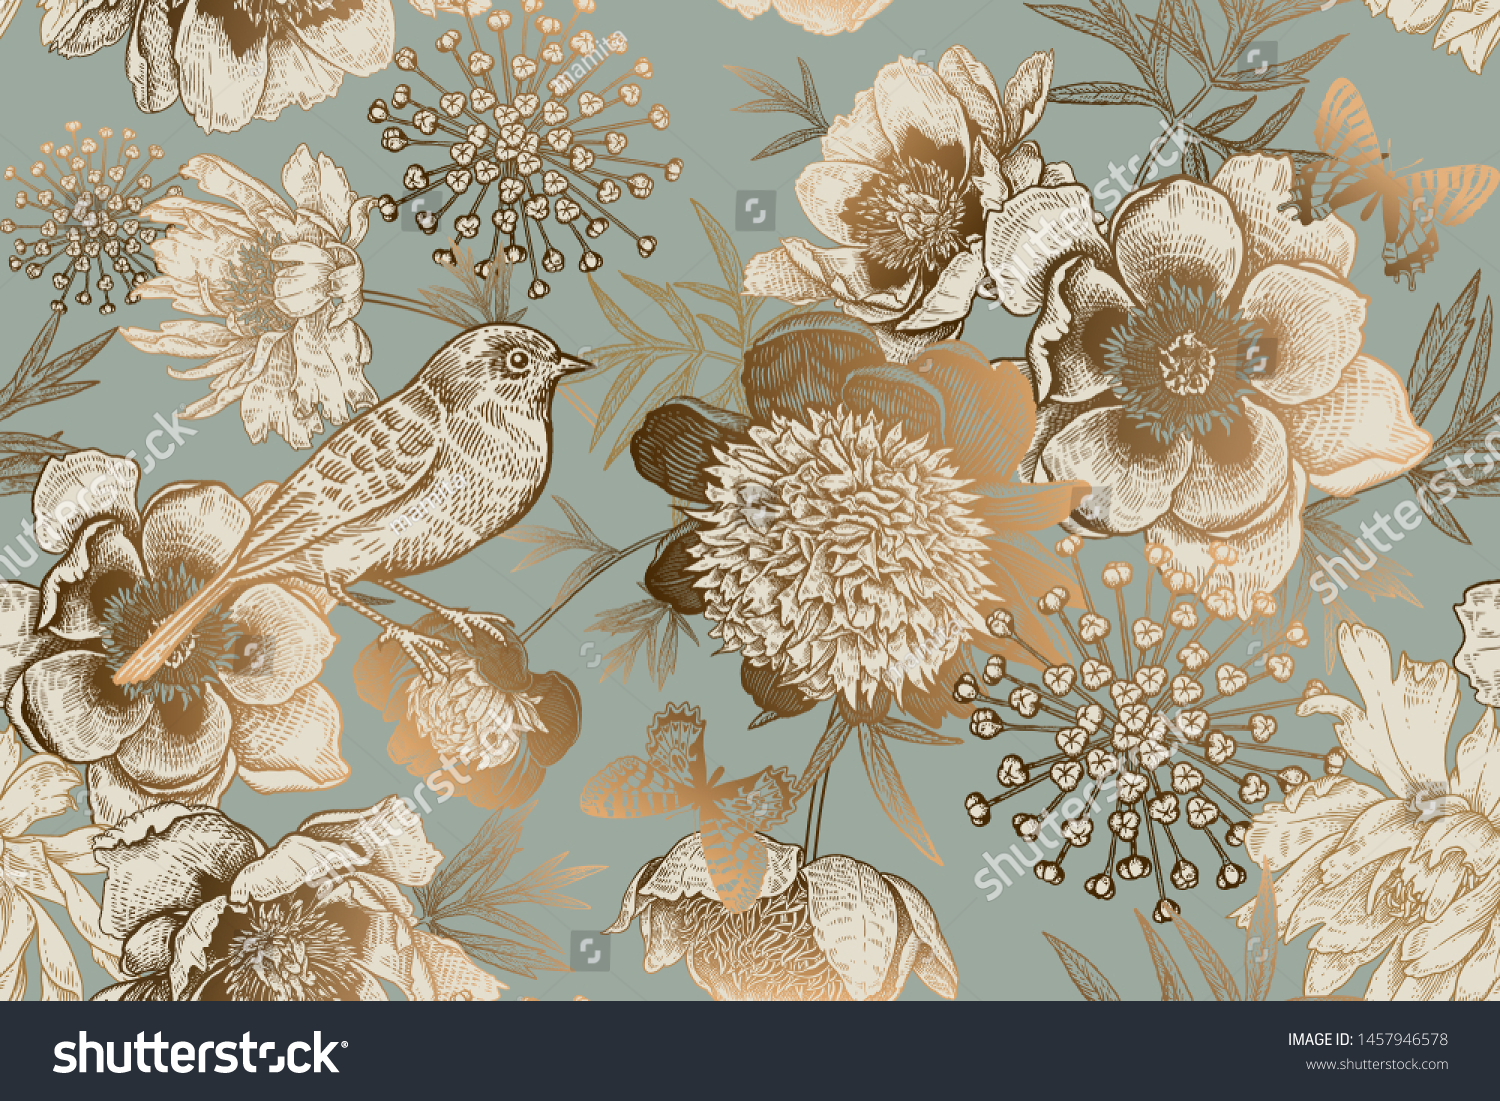 Luxury ornate pattern for creating textiles, wallpaper, paper. Print gold foil on a blue background. Seamless background with garden flowers peonies, bird and butterflies. Vintage. Vector Illustration #1457946578